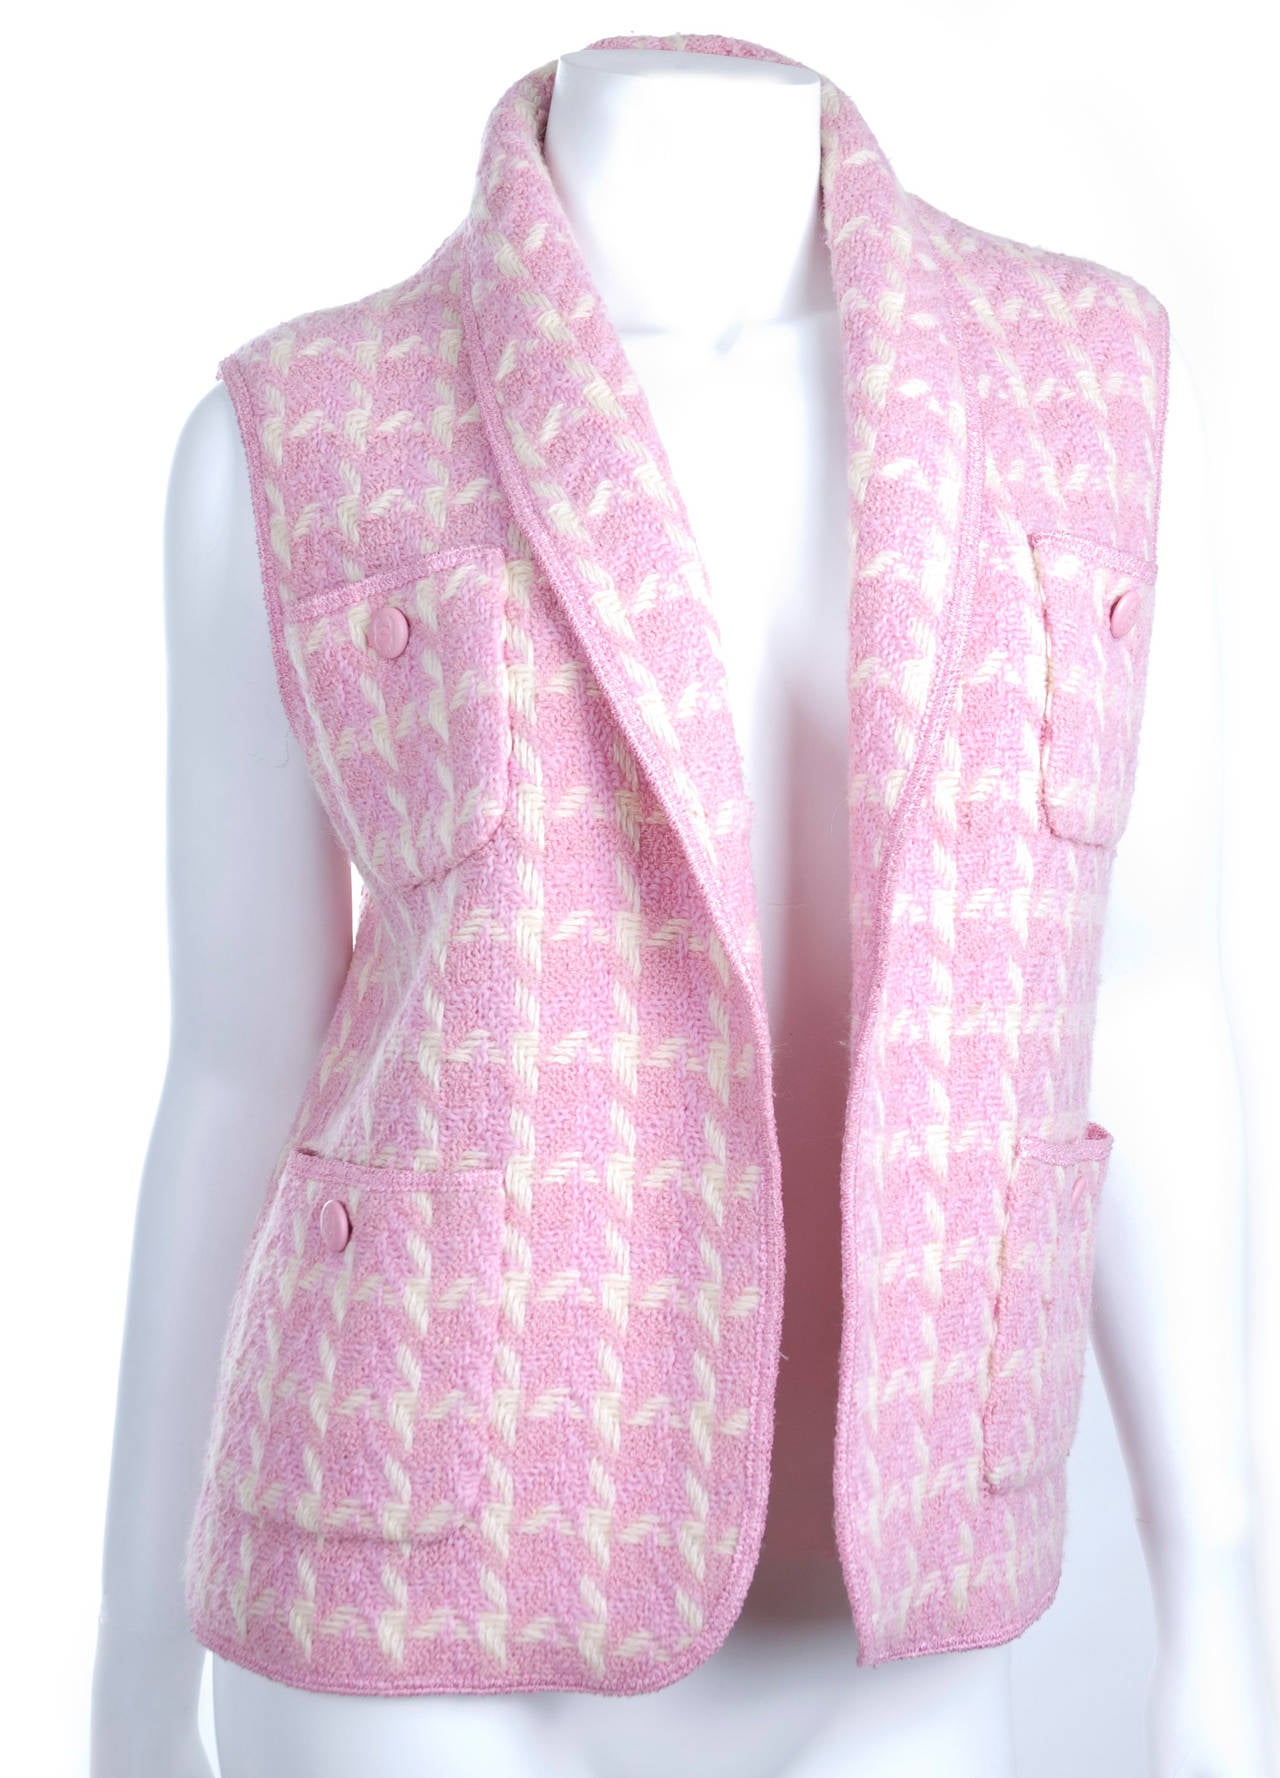 1996 Chanel Vest in pink and creme.
Size 38 EU

Measurements:
Length 23